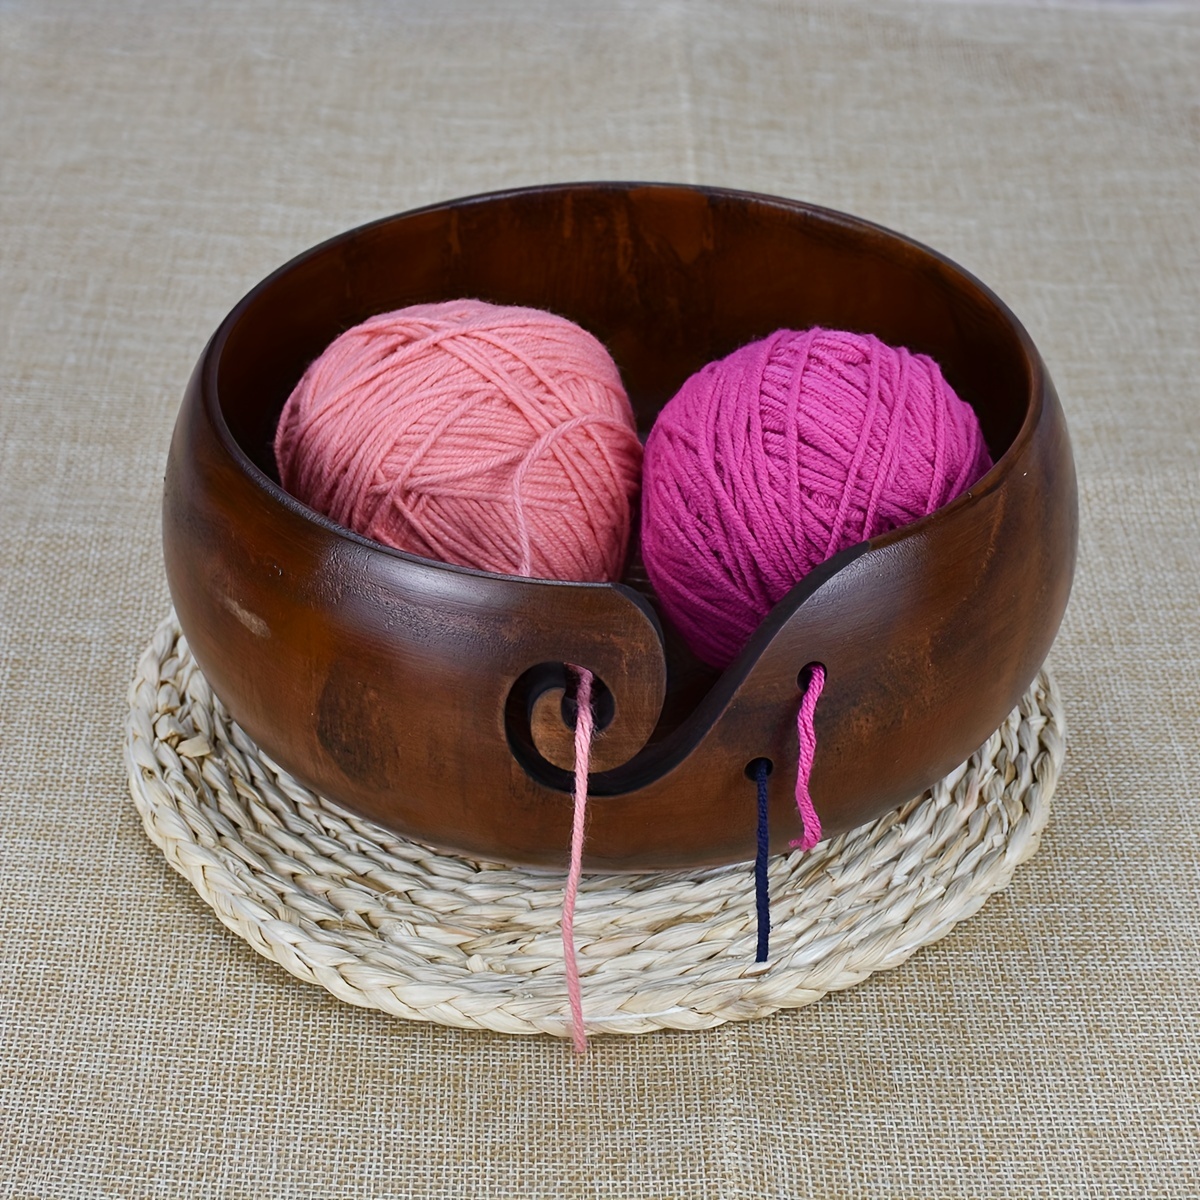  Wooden Yarn Bowl Round Crochet Bowl Holder with Holes Pine  Knitting Yarn Bowls Wooden Weaving Thread Bowl with Lid Portable Yarn  Storage Bowl for DIY Knitting Crafts 5.9x5.9x3inch(Dark with lid)